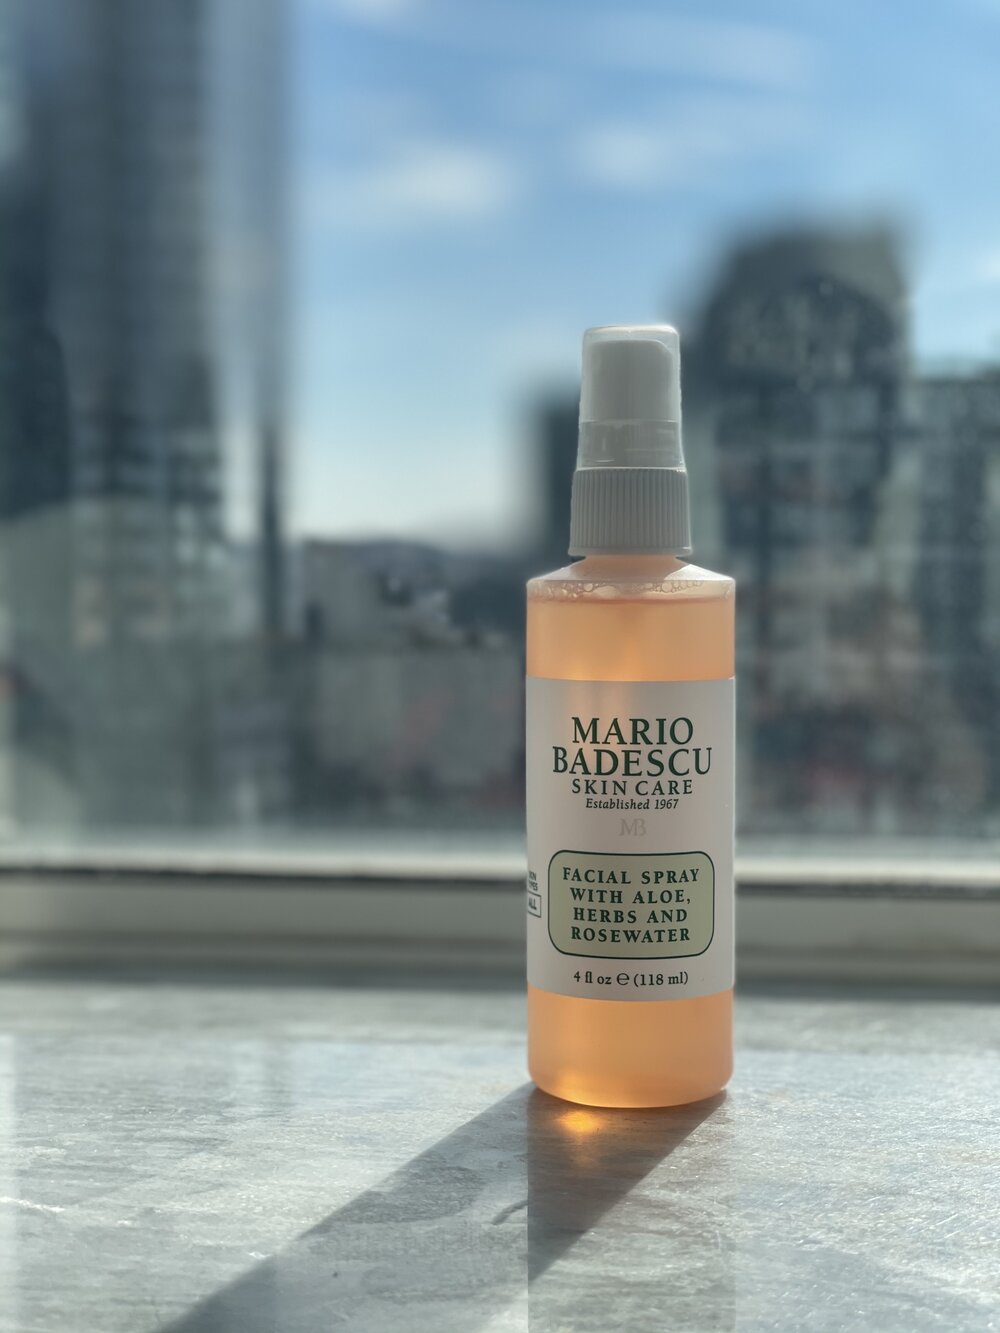 MARIO BADESCU FACIAL SPRAY WITH ALOE, HERBS AND ROSEWATER – BEST